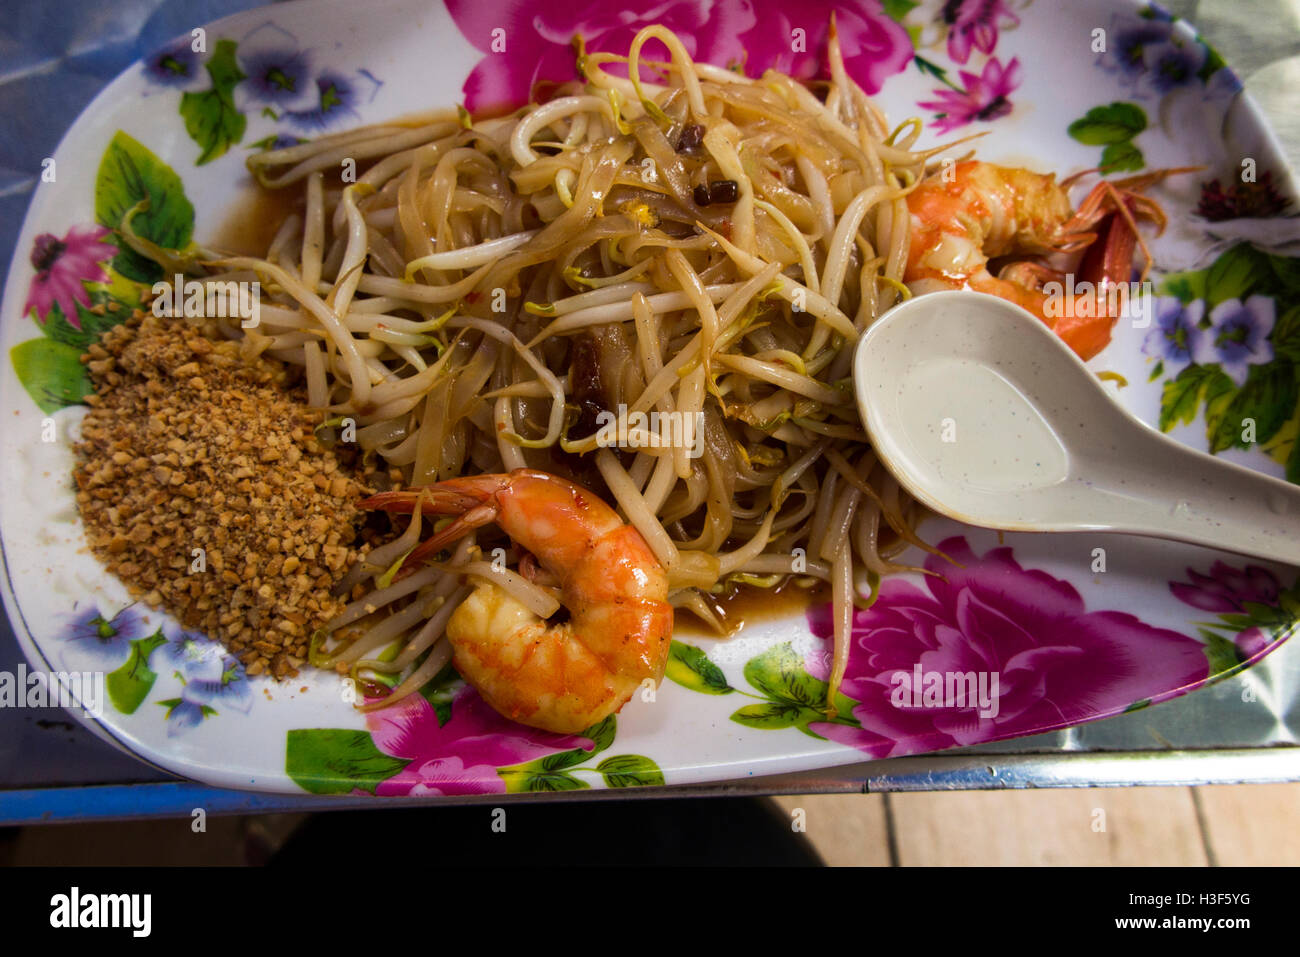 Singapore, Food, fried noodles and beansprouts with prawns and crushed peanuts Stock Photo